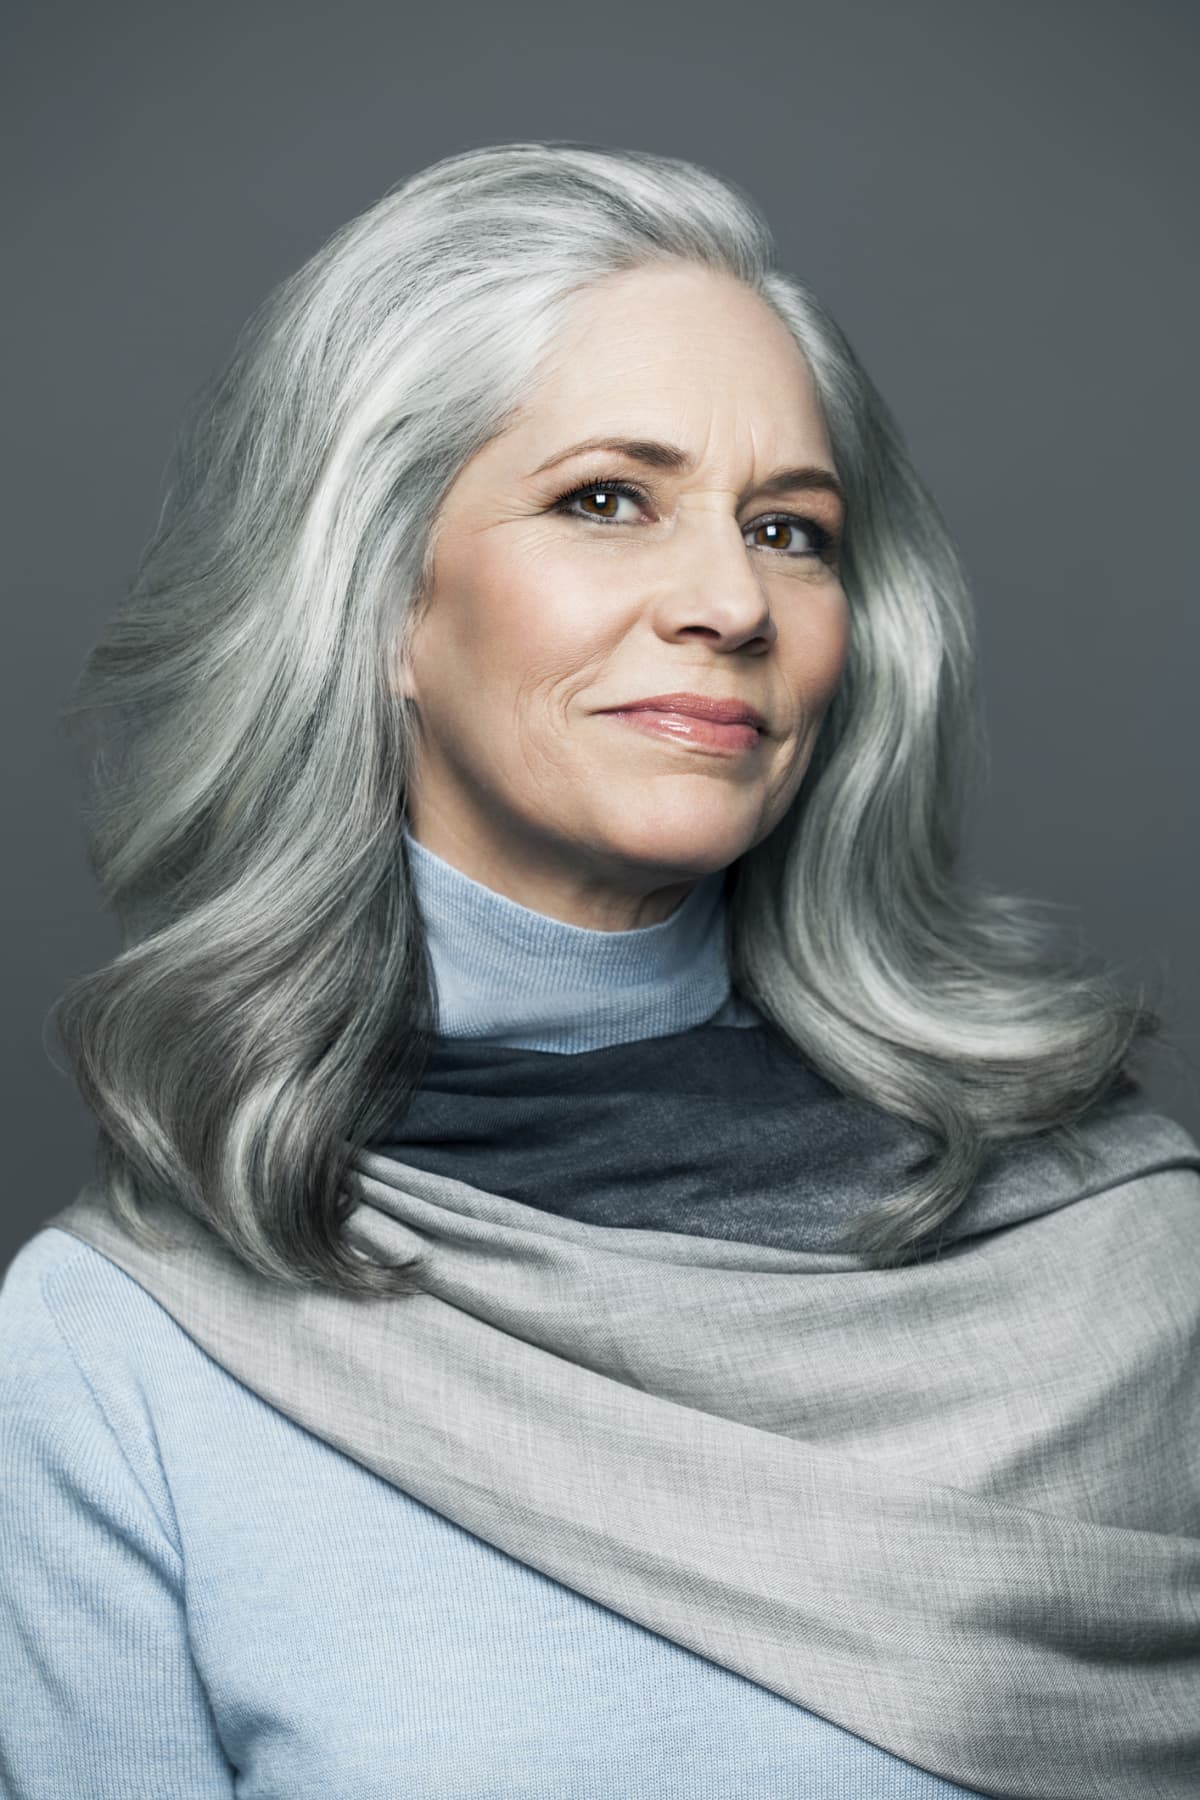 What Is The Average Age To Get Gray Hair?